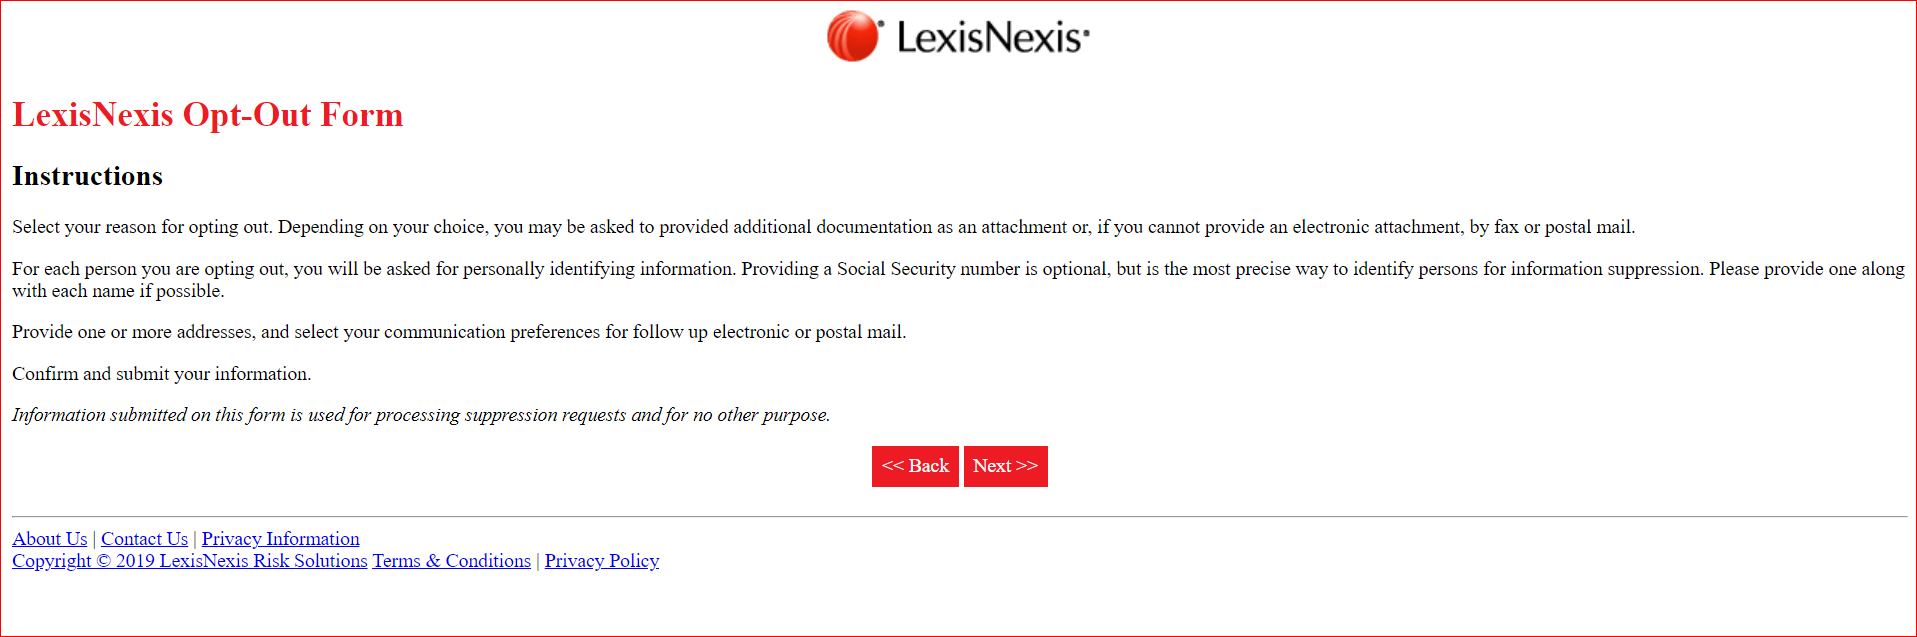 Lexis Nexis Opt Out Instructions